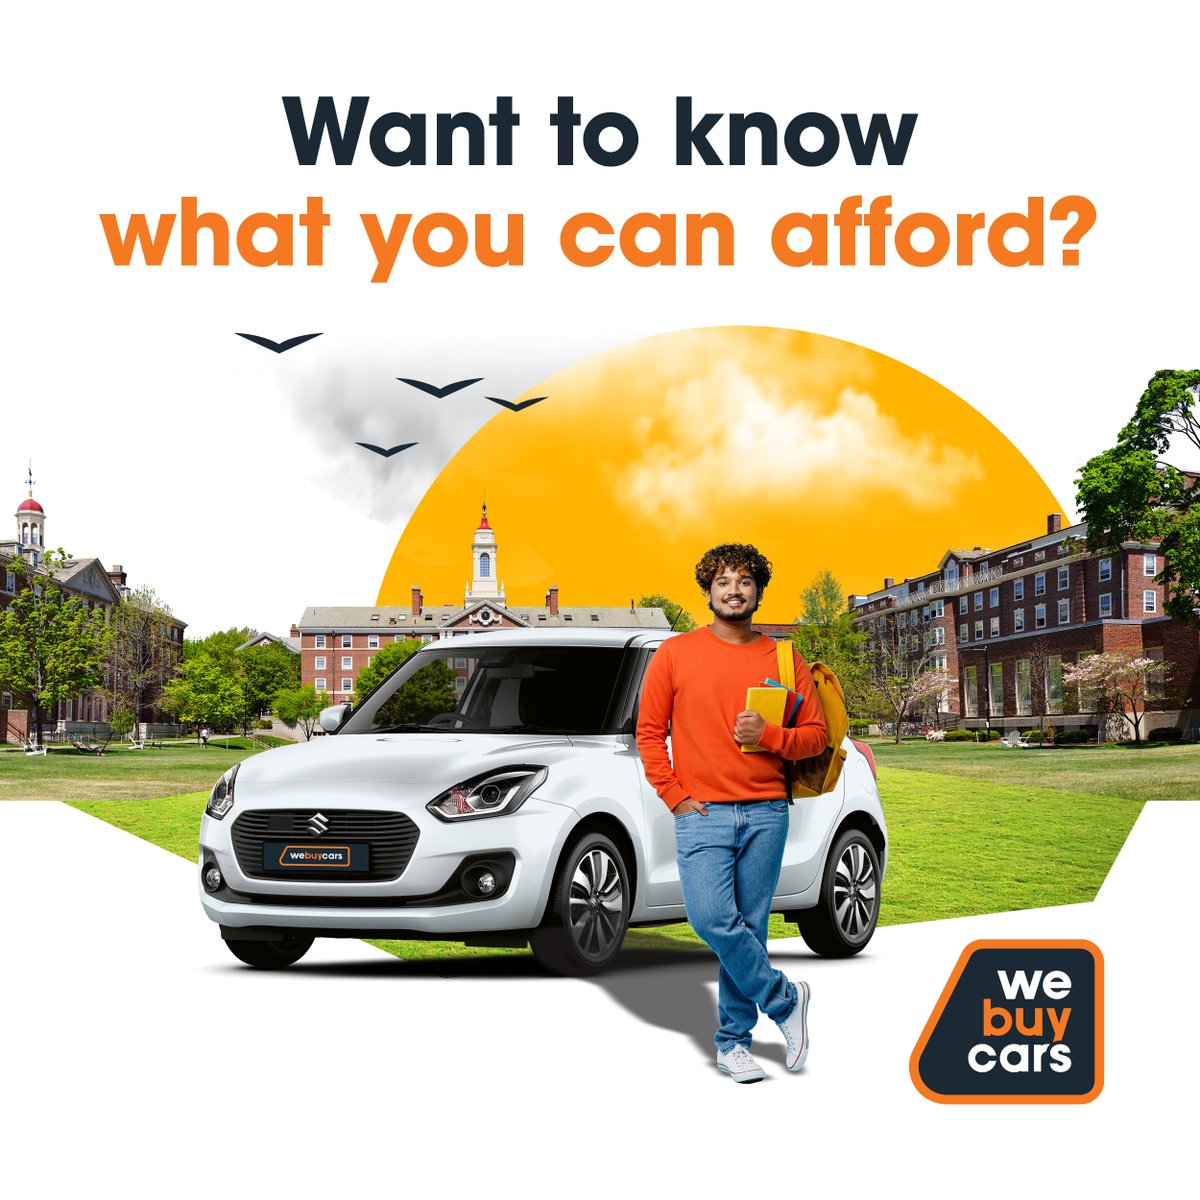 Did you know the affordability calculator on our website can help you find the perfect car within your budget? 🚗💸

#carsforsale #preownedcars #usedcars #usedcarsforsale #carshopping #carfinance #autosales #carsales #carlifestyle #suzukiswift